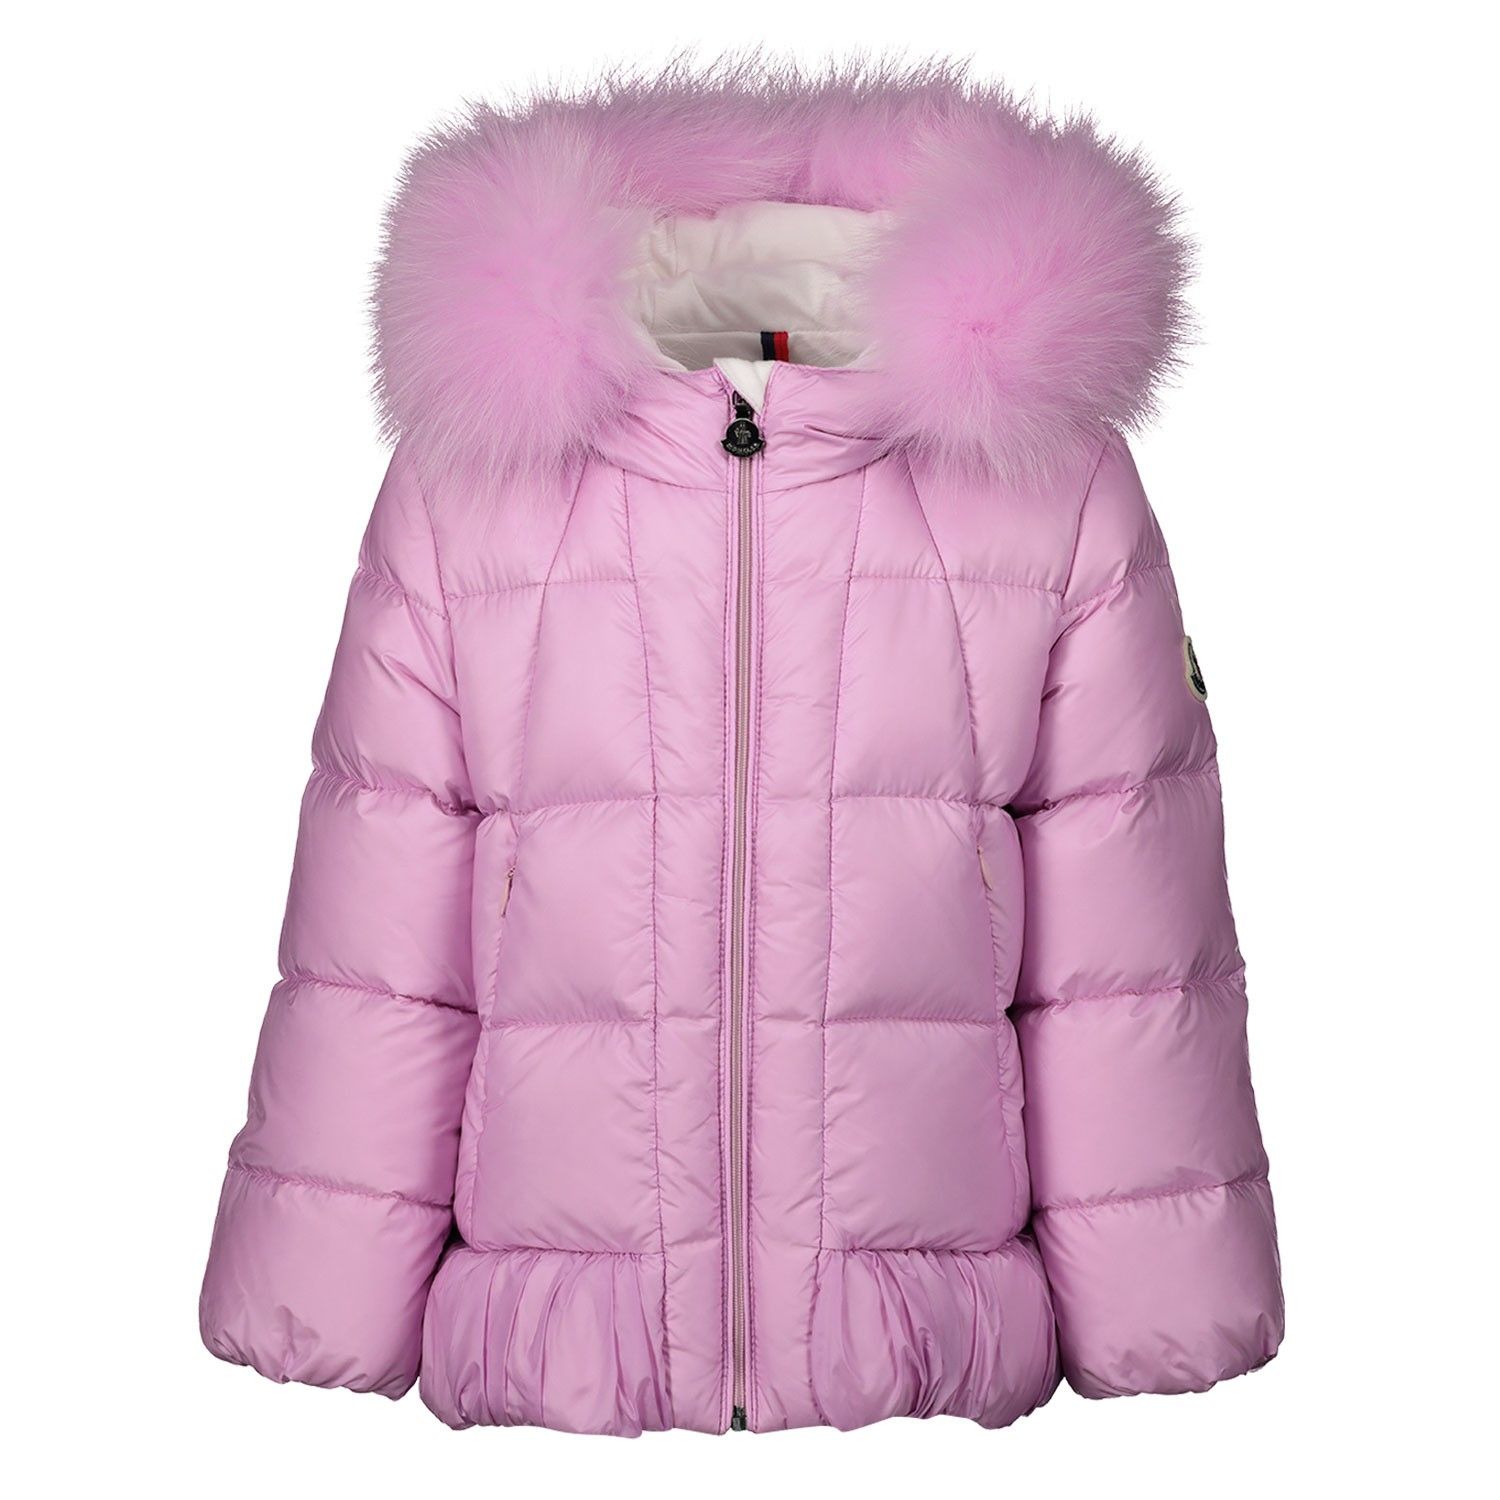 pink moncler baby coat,OFF 71%,www.concordehotels.com.tr